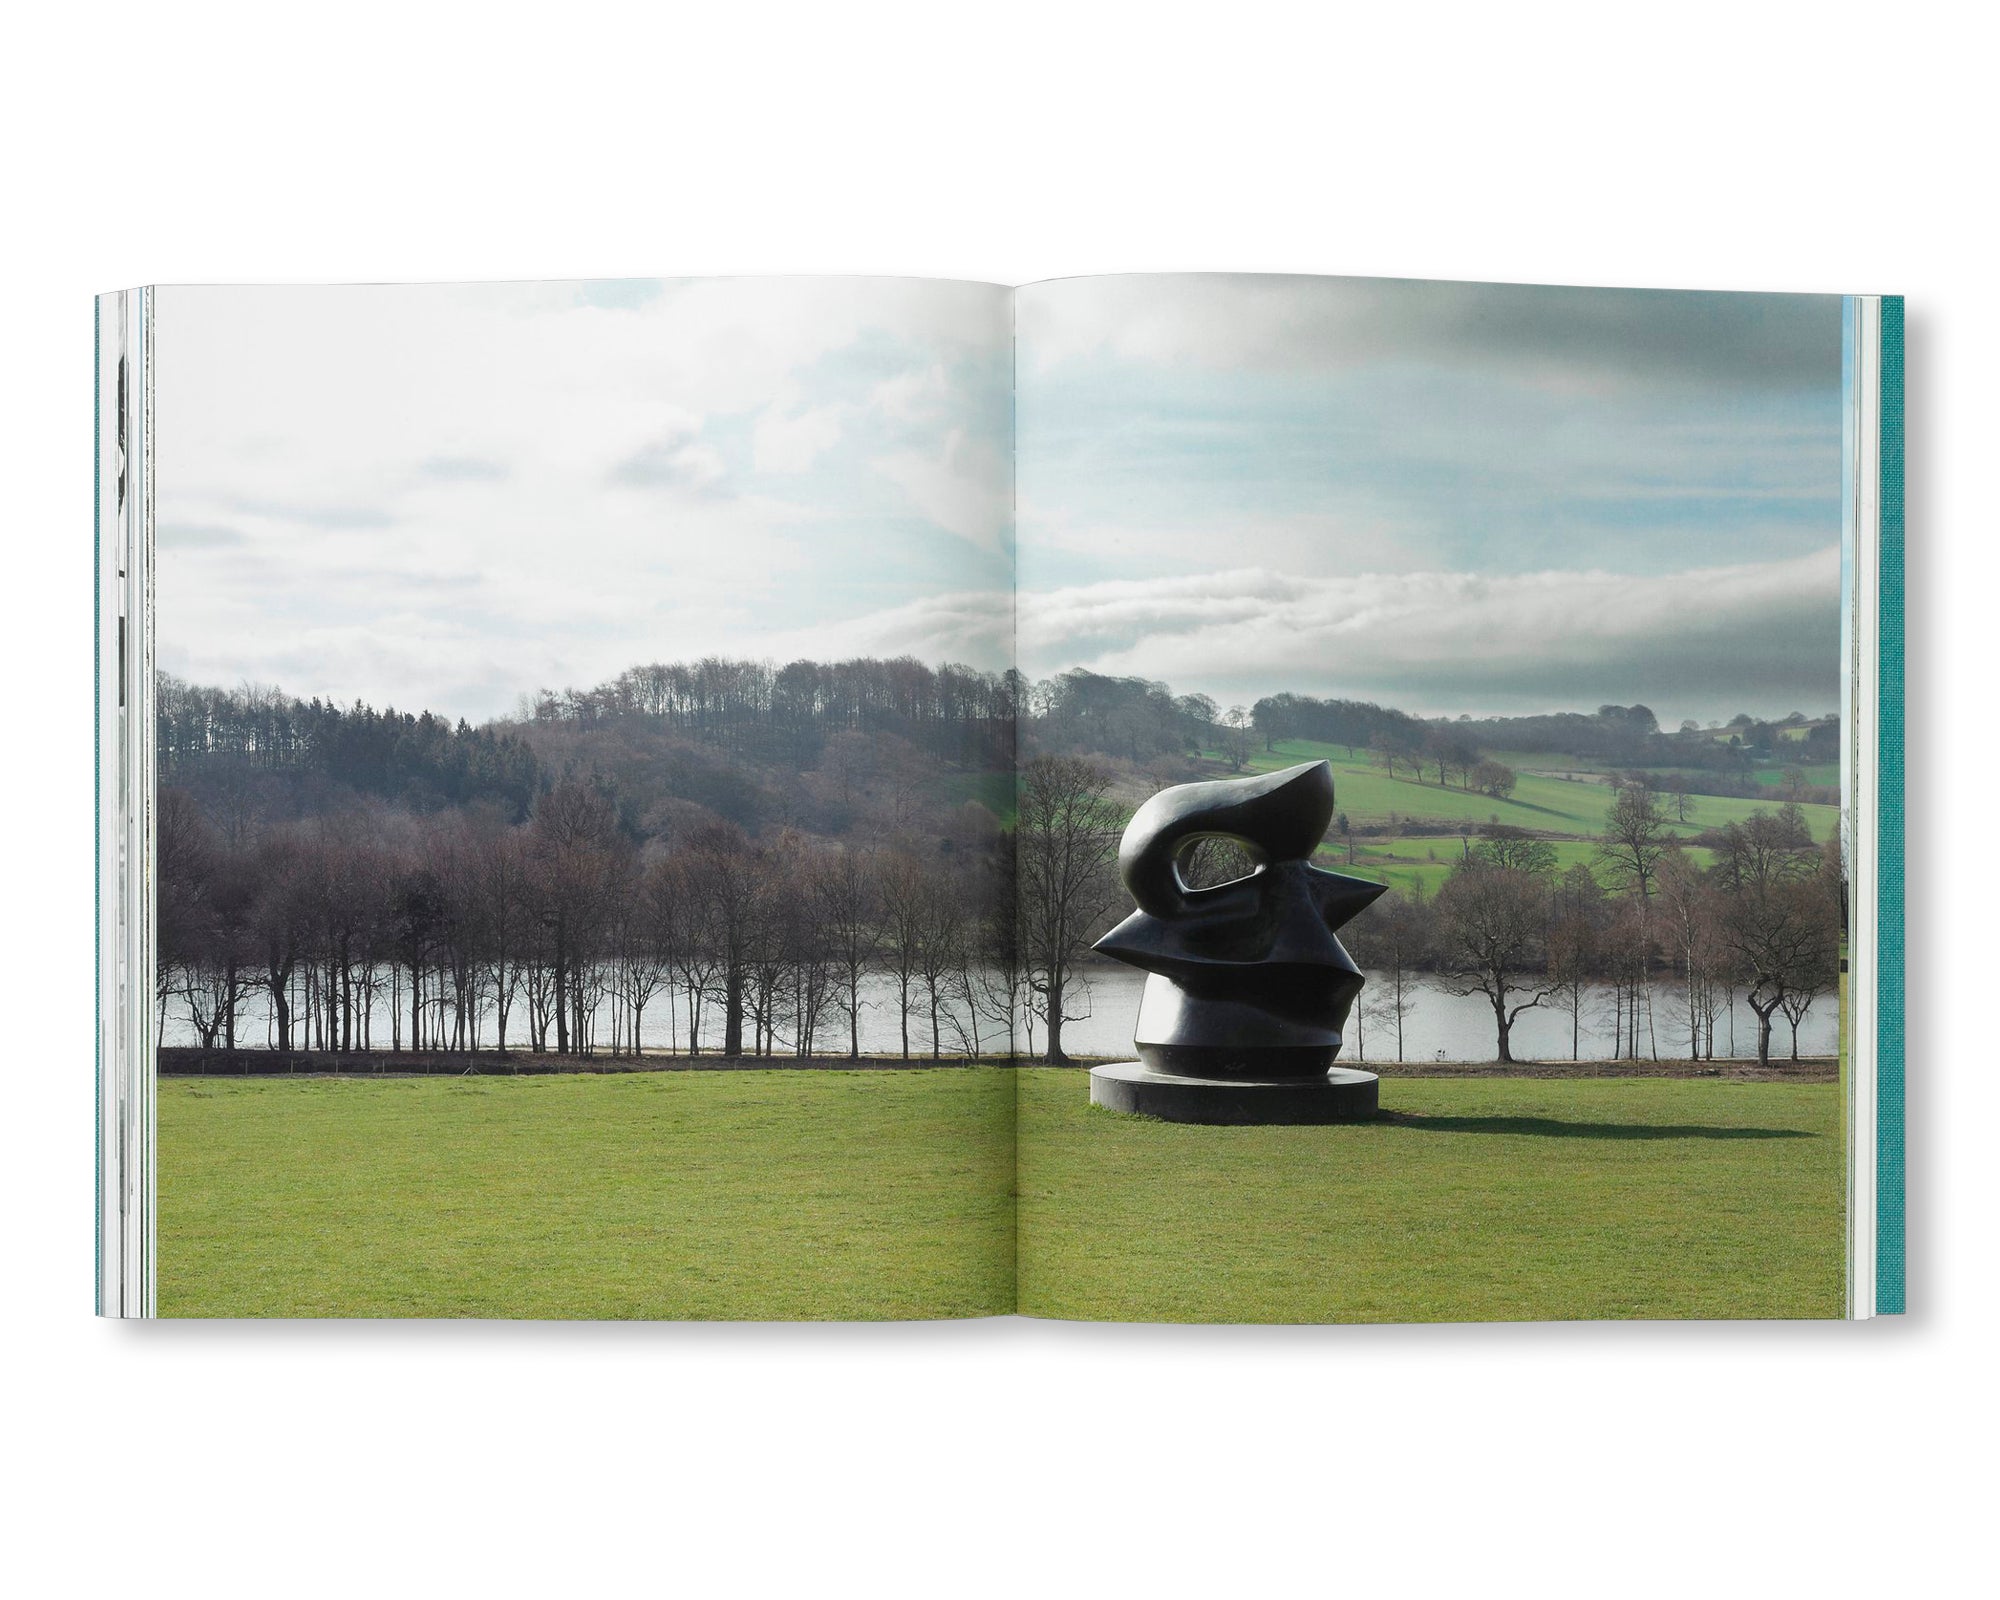 LATE LARGE FORMS by Henry Moore